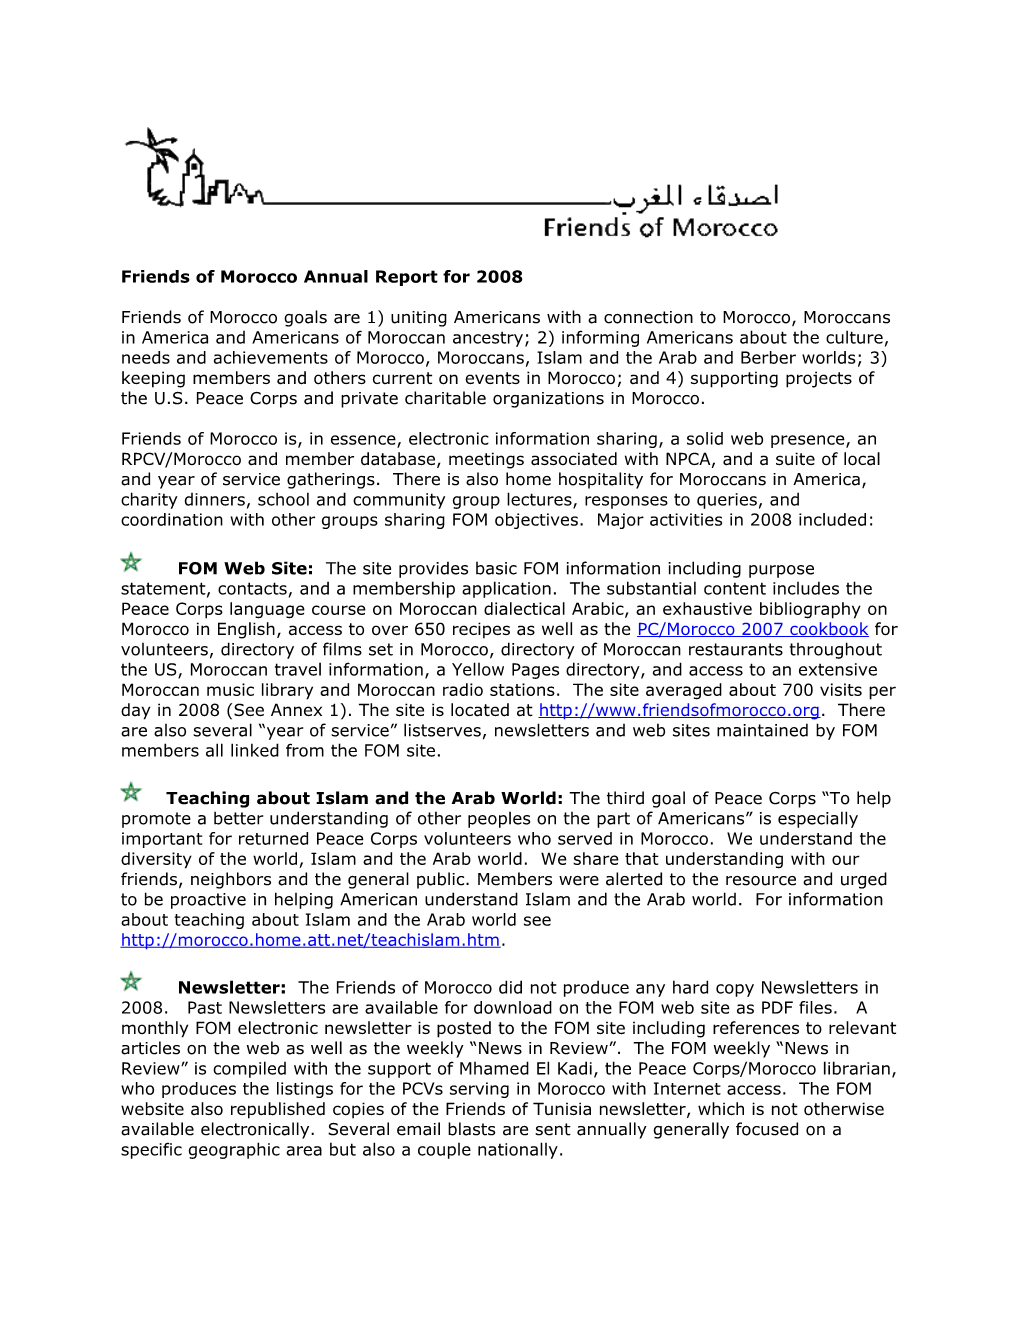 Friends of Morocco Annual Report for 1999